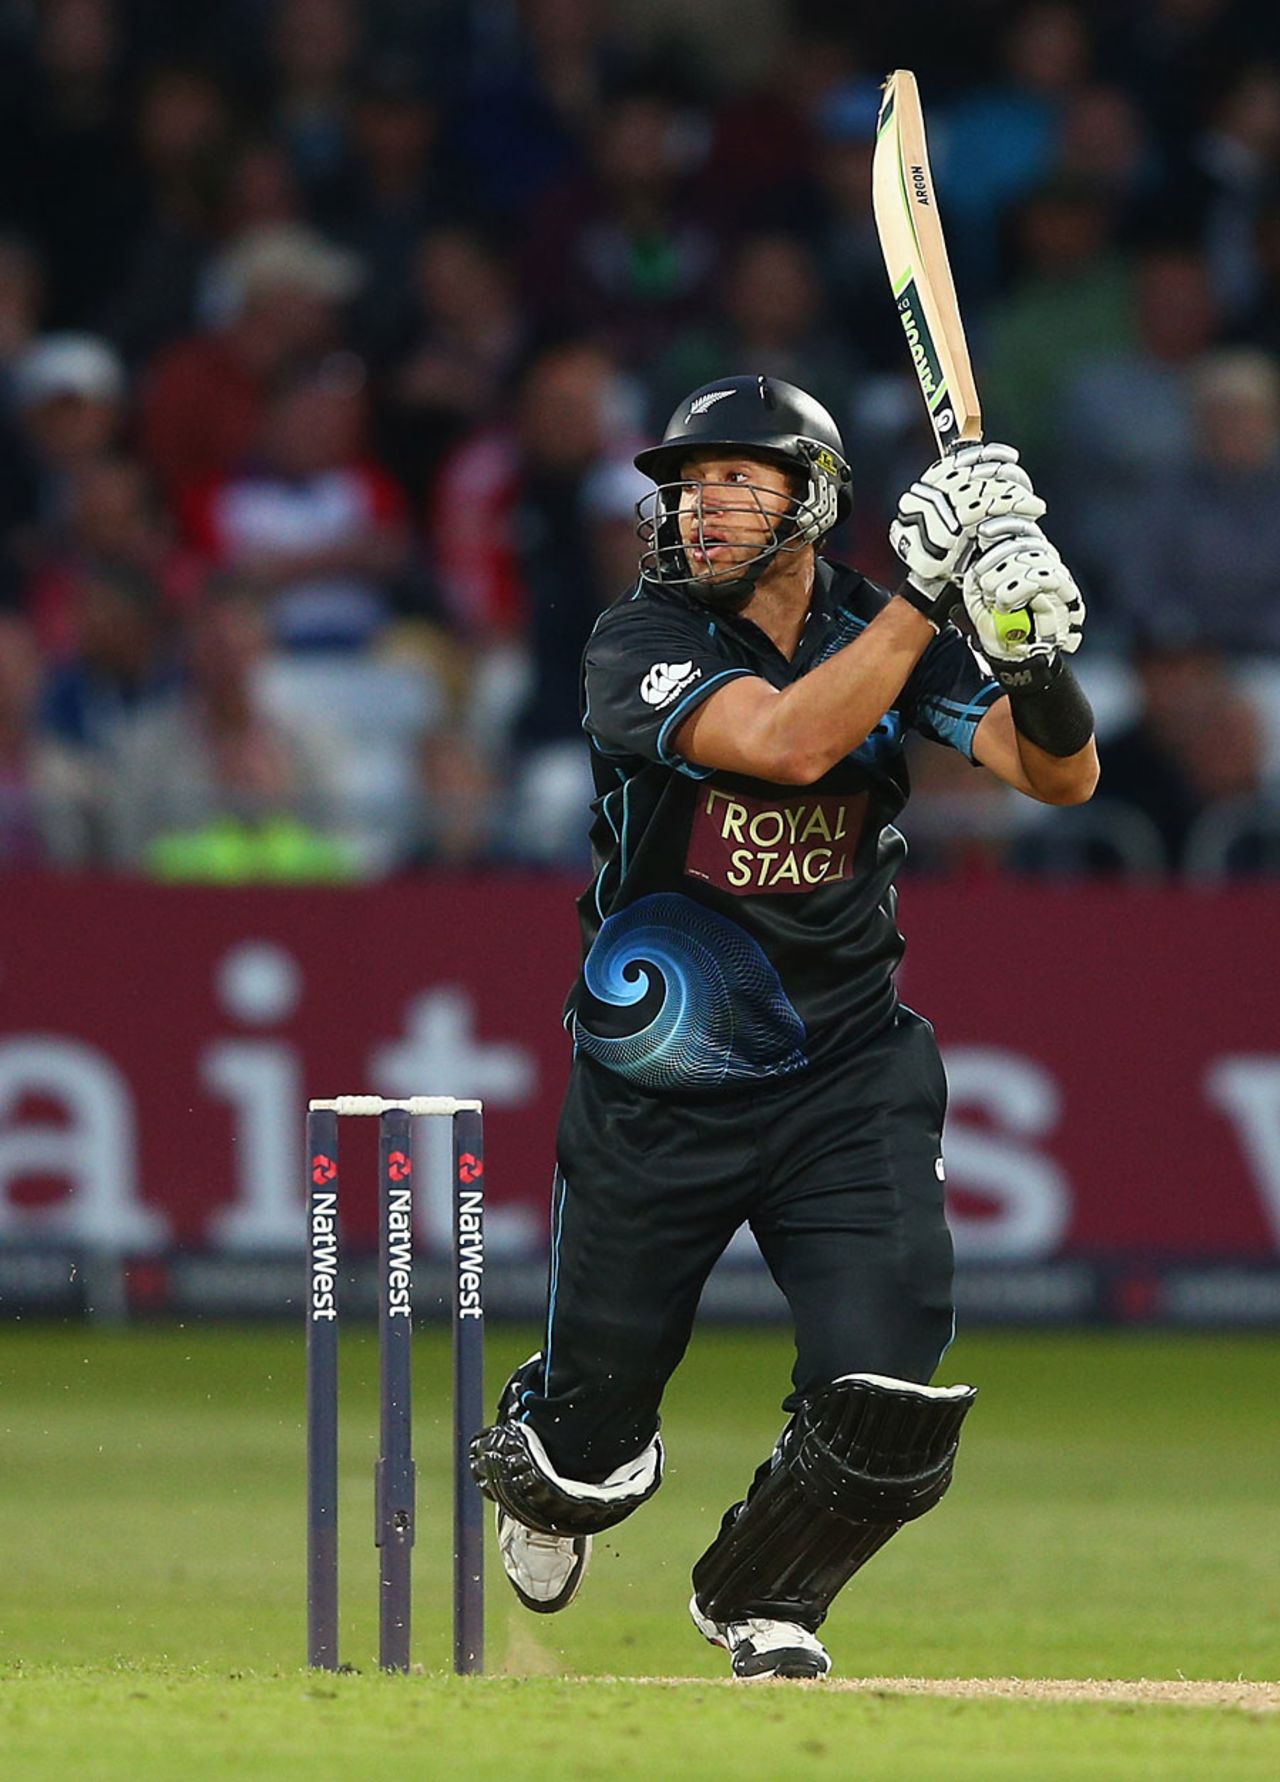 Ross Taylor tried to keep New Zealand afloat with his third fifty of the series, England v New Zealand, 2nd ODI, Trent Bridge, June 5, 2013